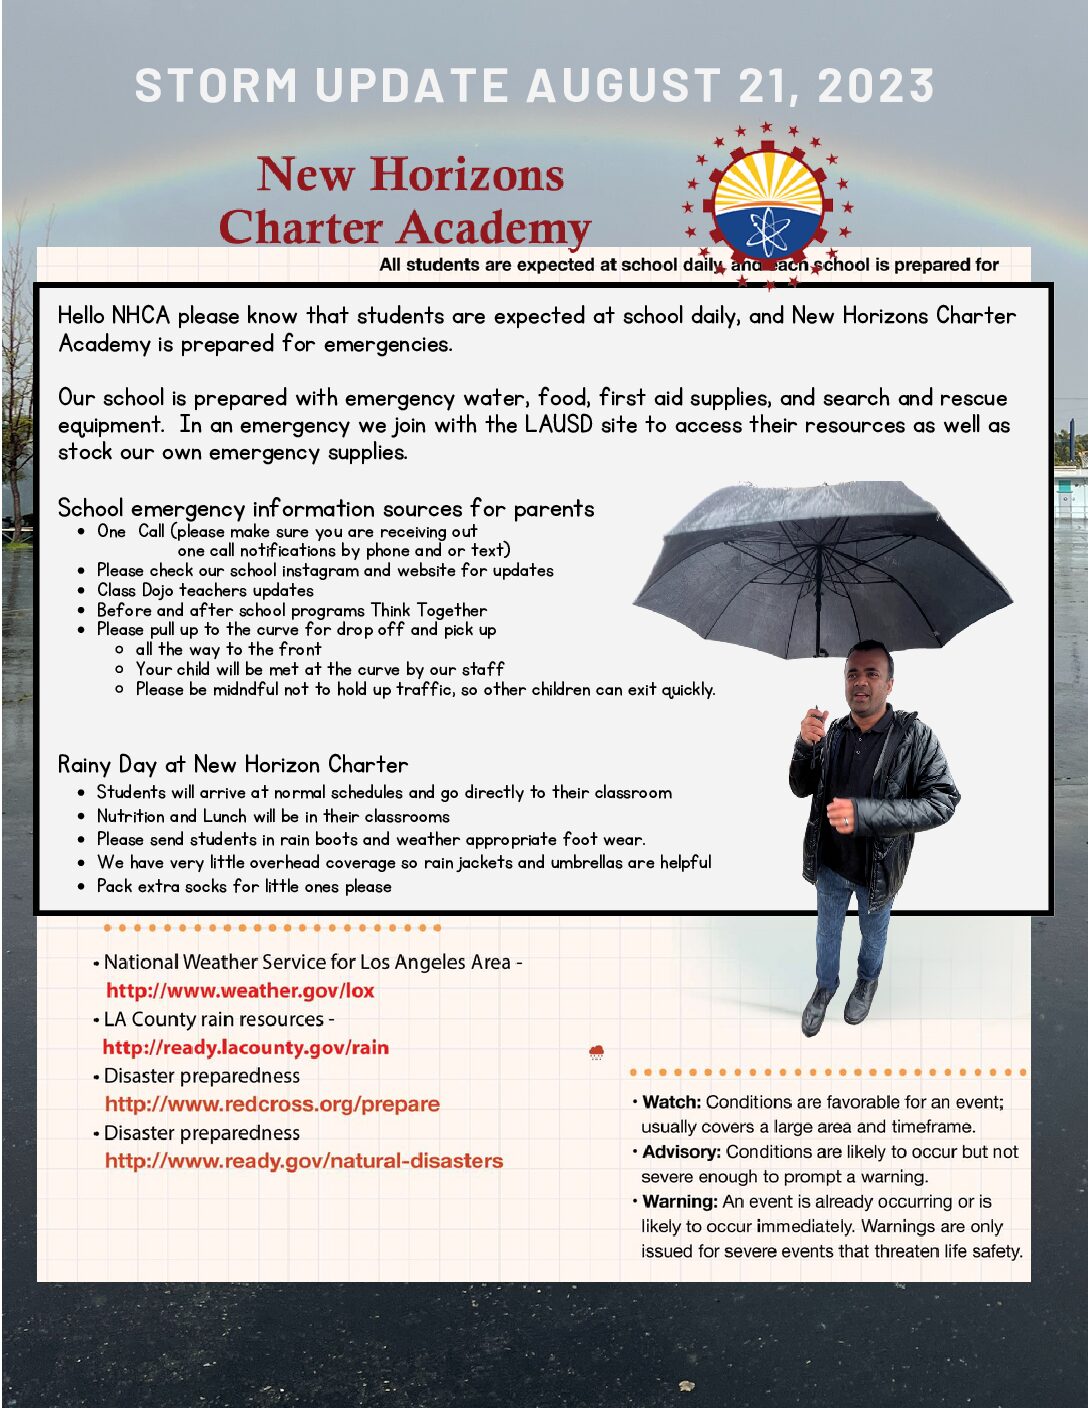 Emergency quick guide & NHCA storm update on protocols